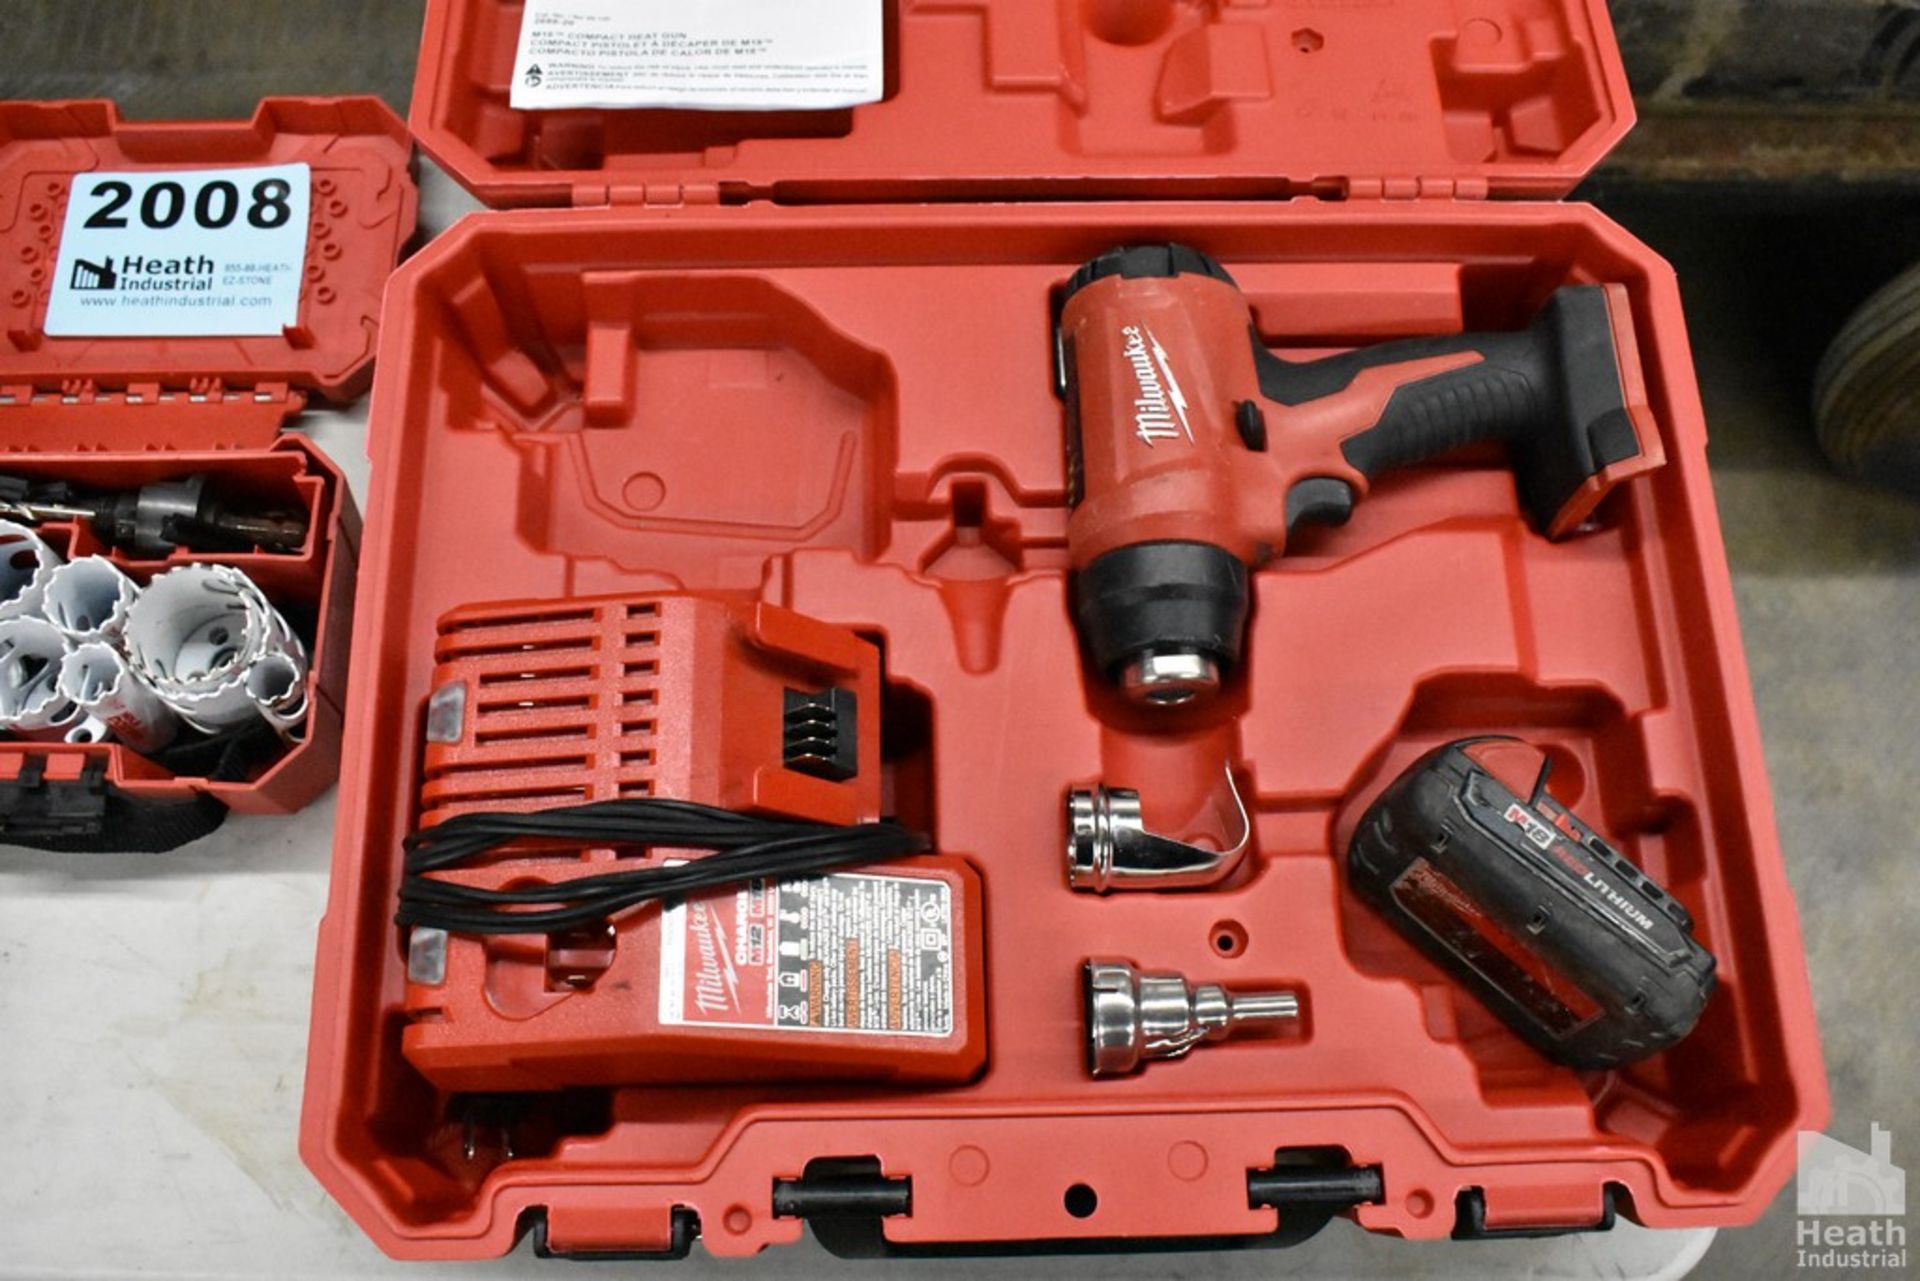 MILWAUKEE COMPACT HEAT GUN, MODEL 2688-20, WITH CHARGER, BATTERY AND CASE - Image 2 of 2